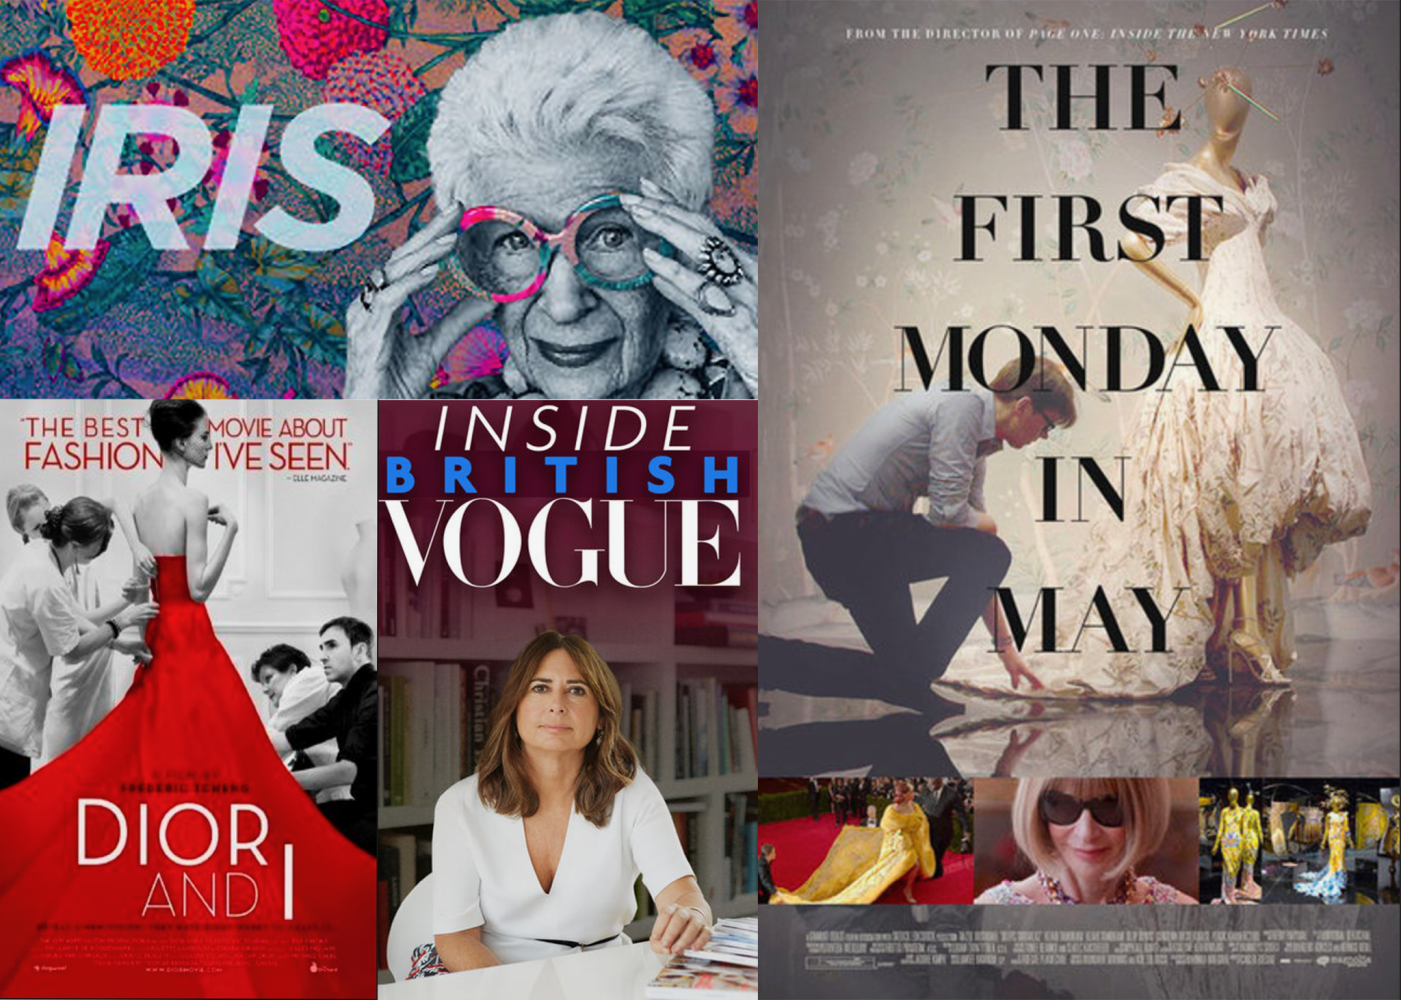 Binge on some fashion-focused shows on Netflix, including America’s Next Top Model, The Hills and Skin Wars, among others.